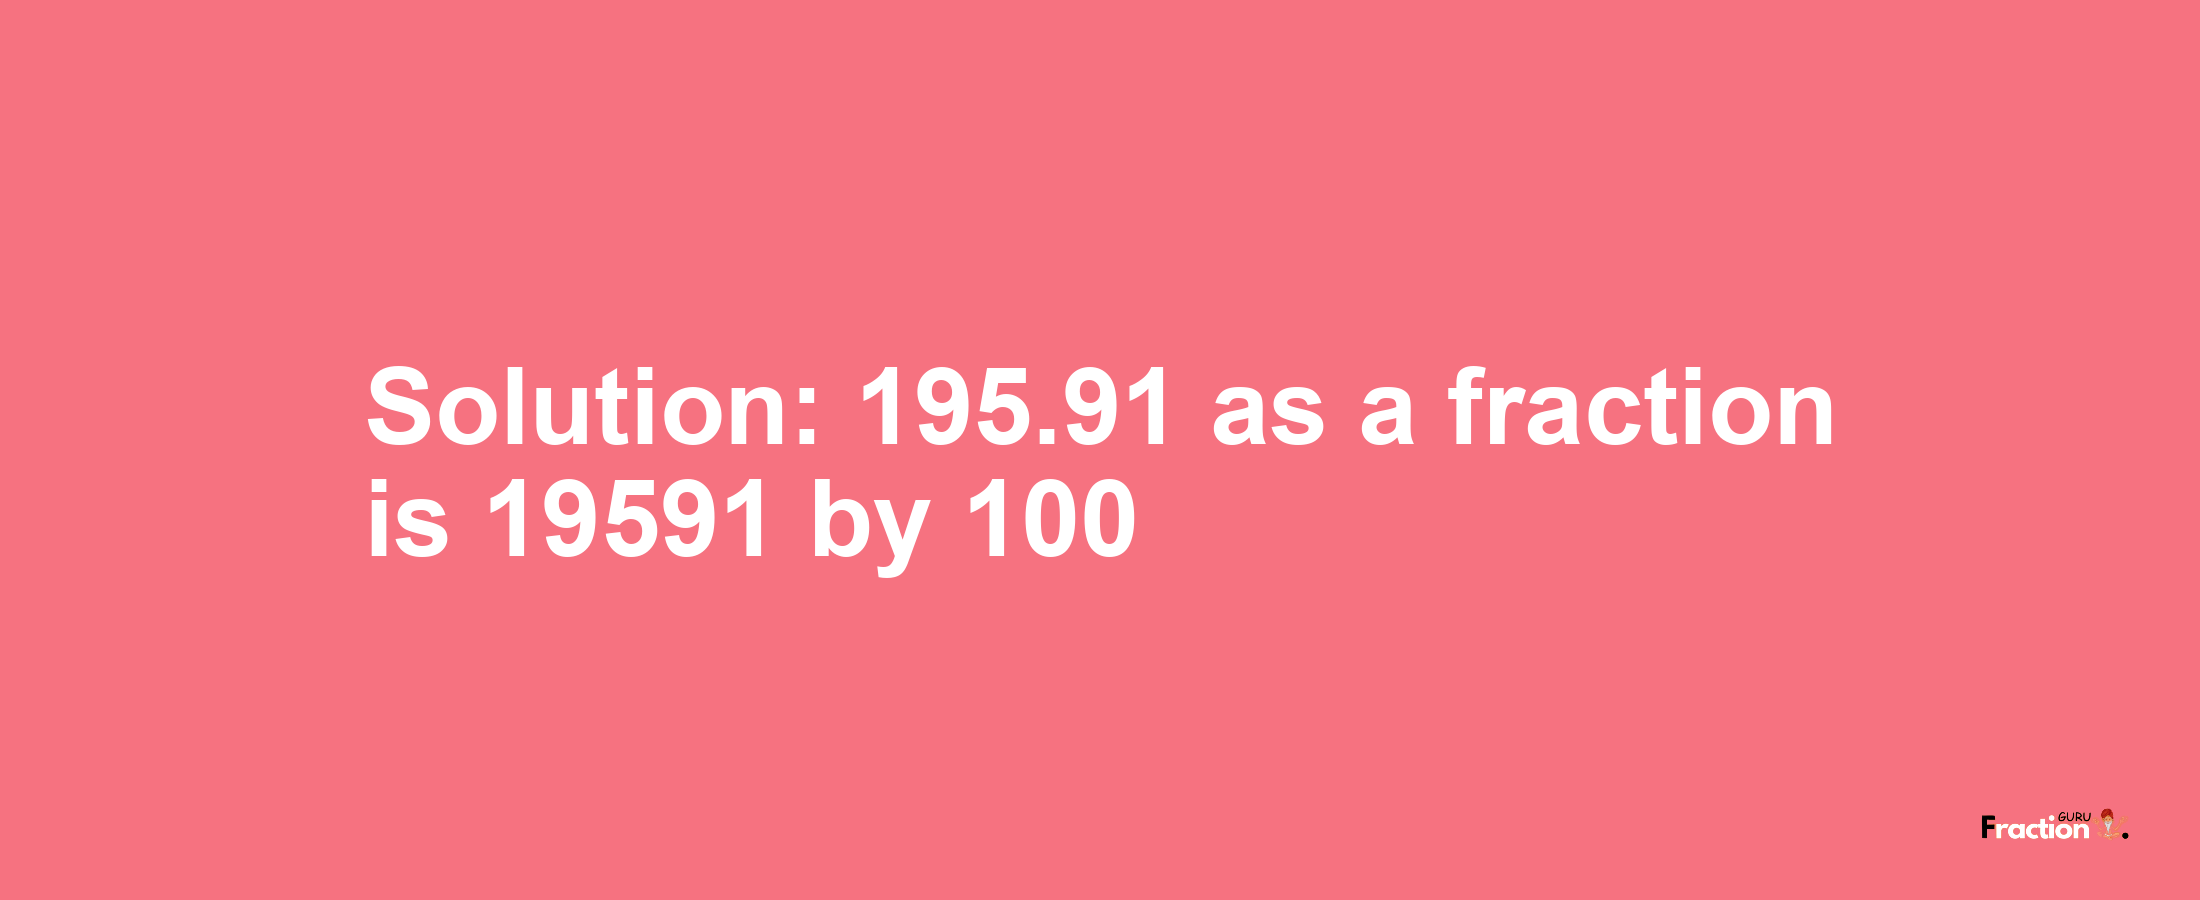 Solution:195.91 as a fraction is 19591/100